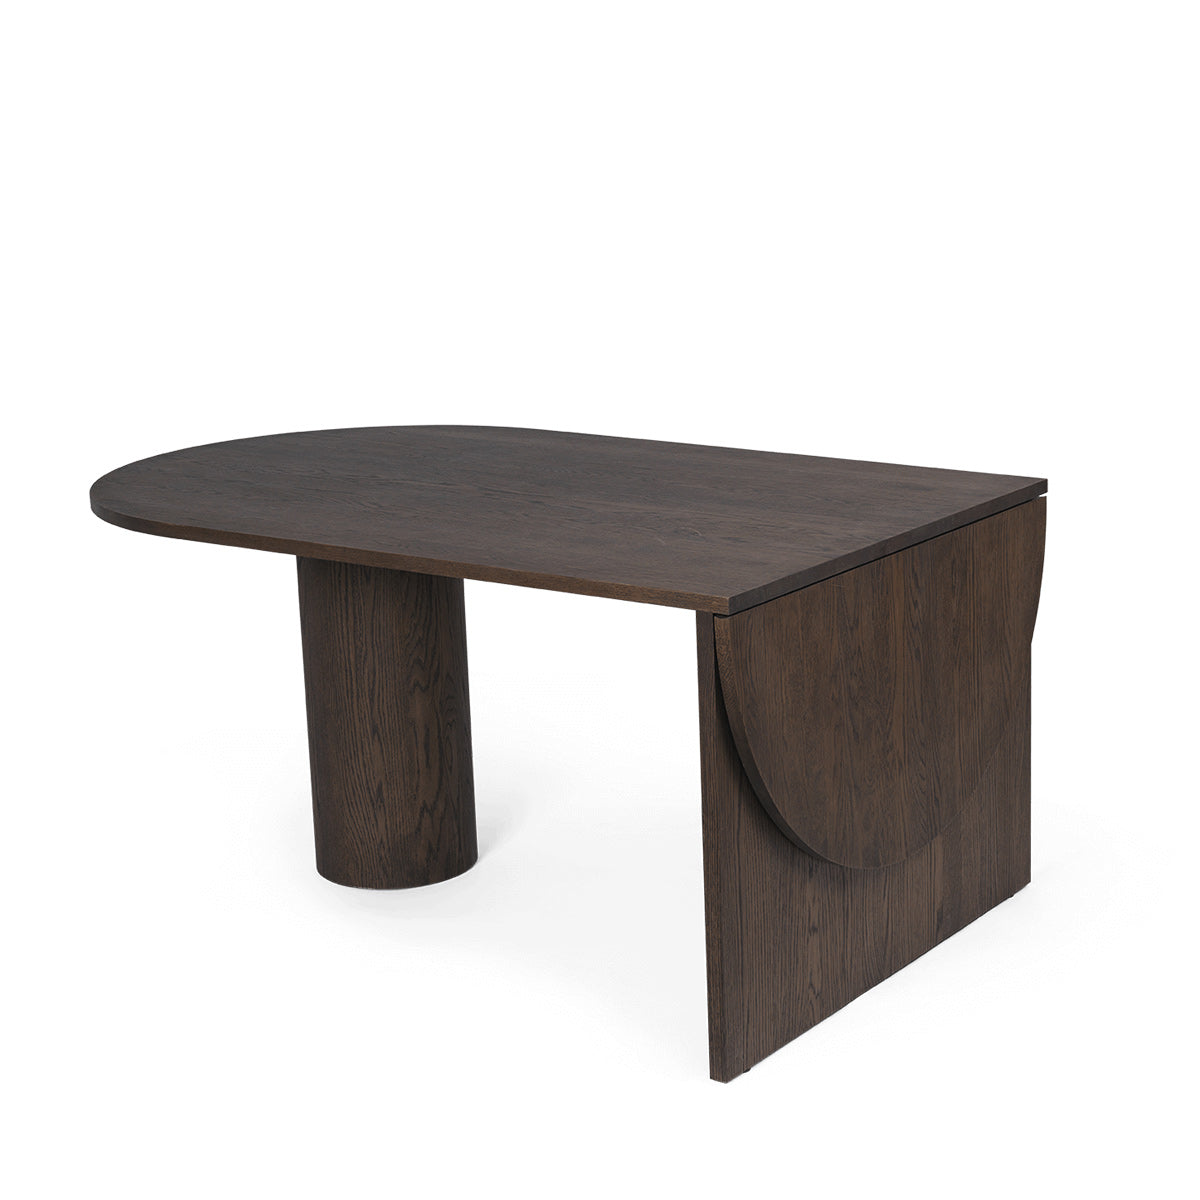 Pylo Dining Table - Dark Stained Oak